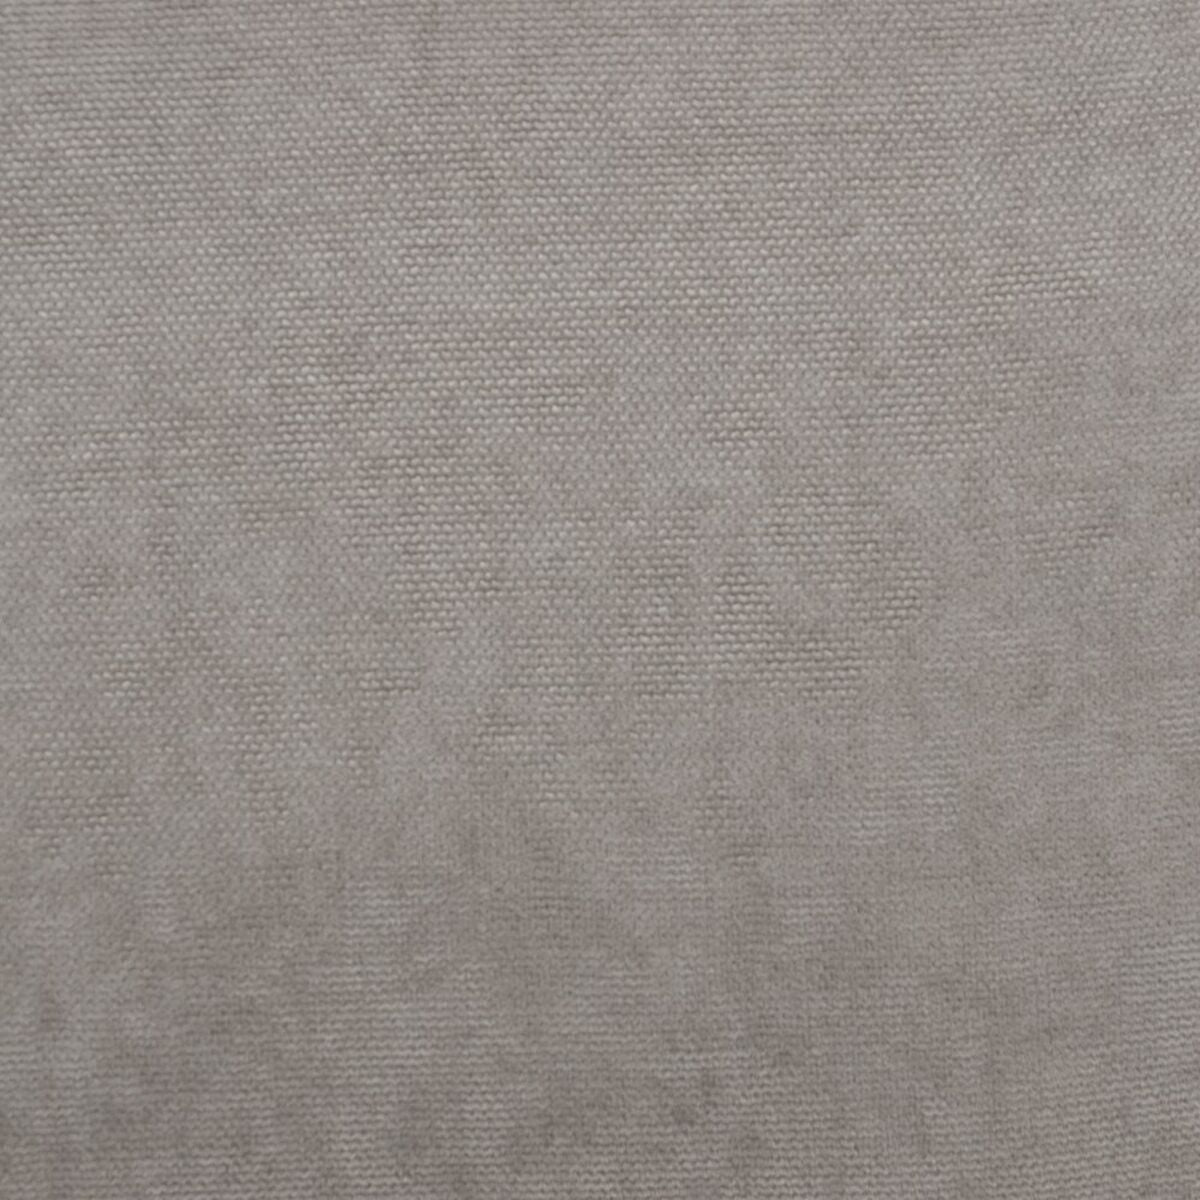 Cushion Polyester Taupe 45 x 30 cm